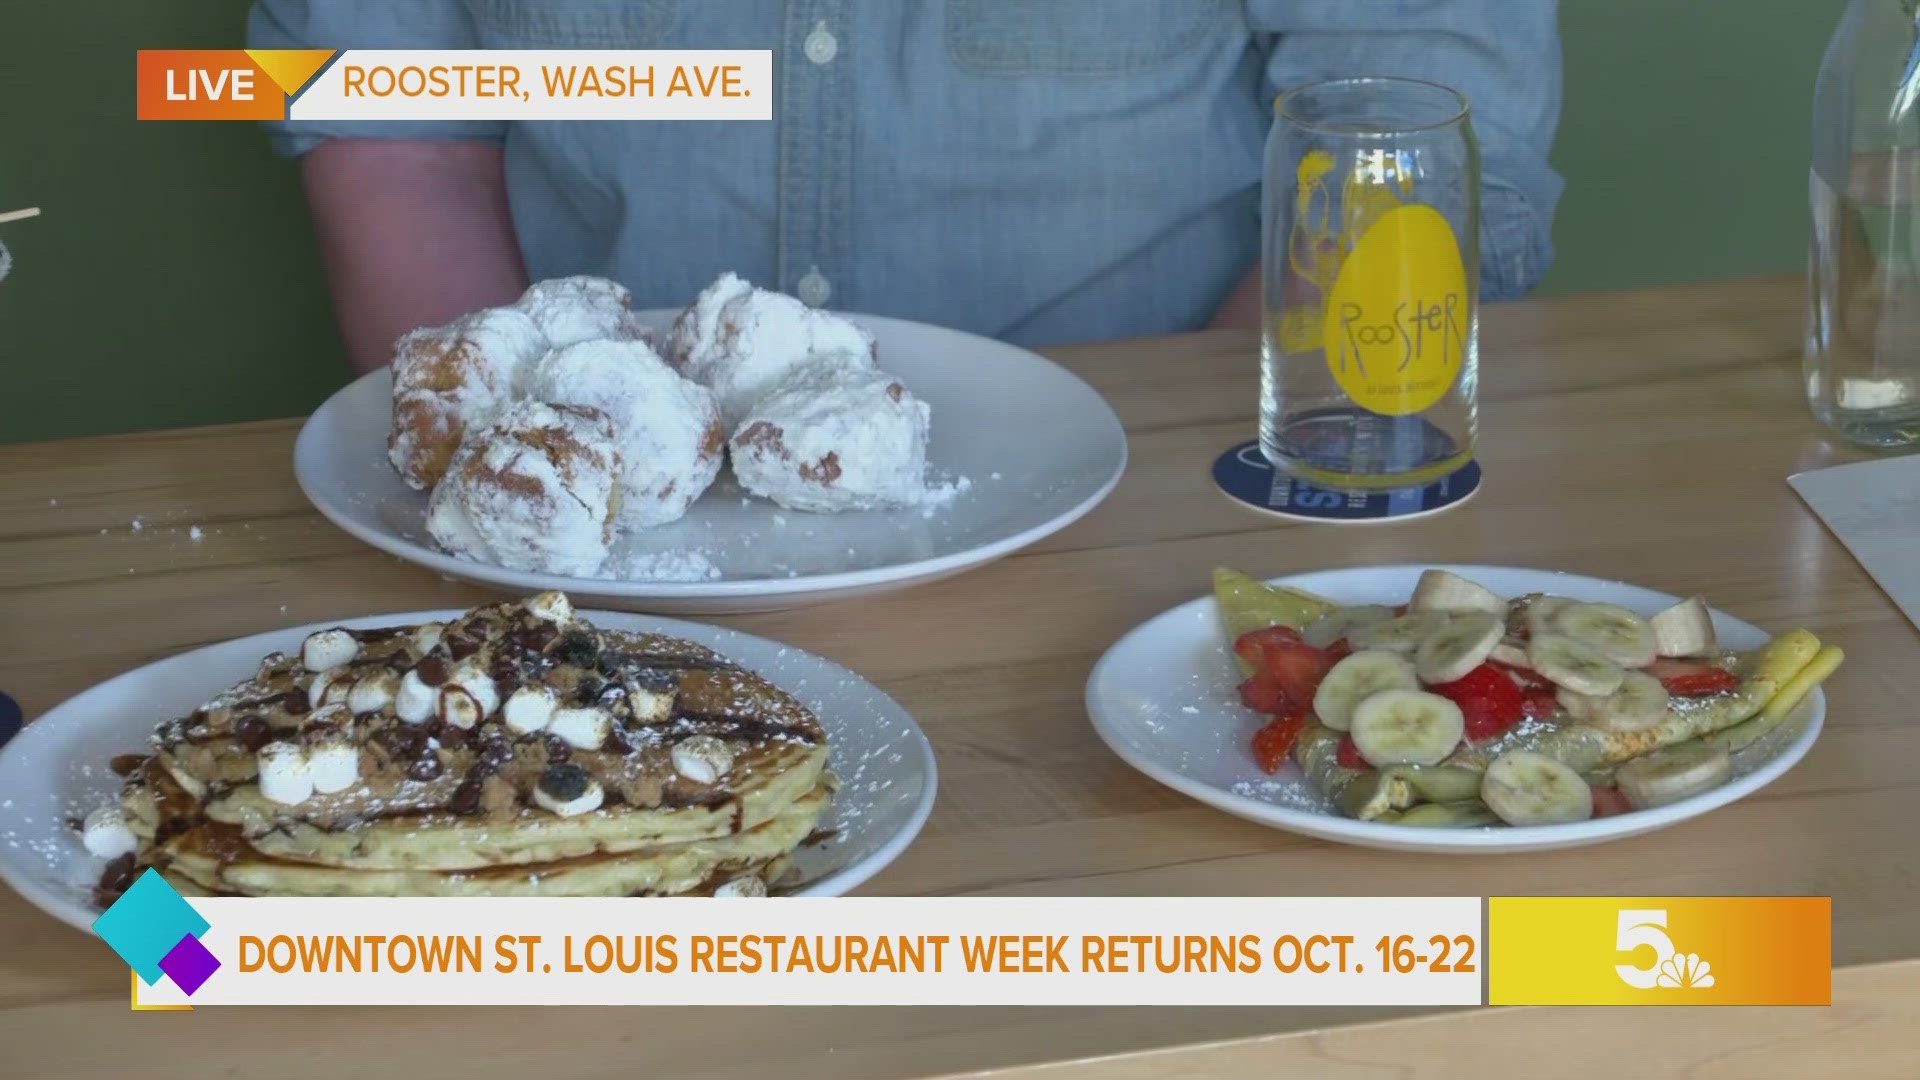 SMSL's Mary T. stops by Rooster, just one of the many participating restaurants in Downtown St. Louis Restaurant Week.